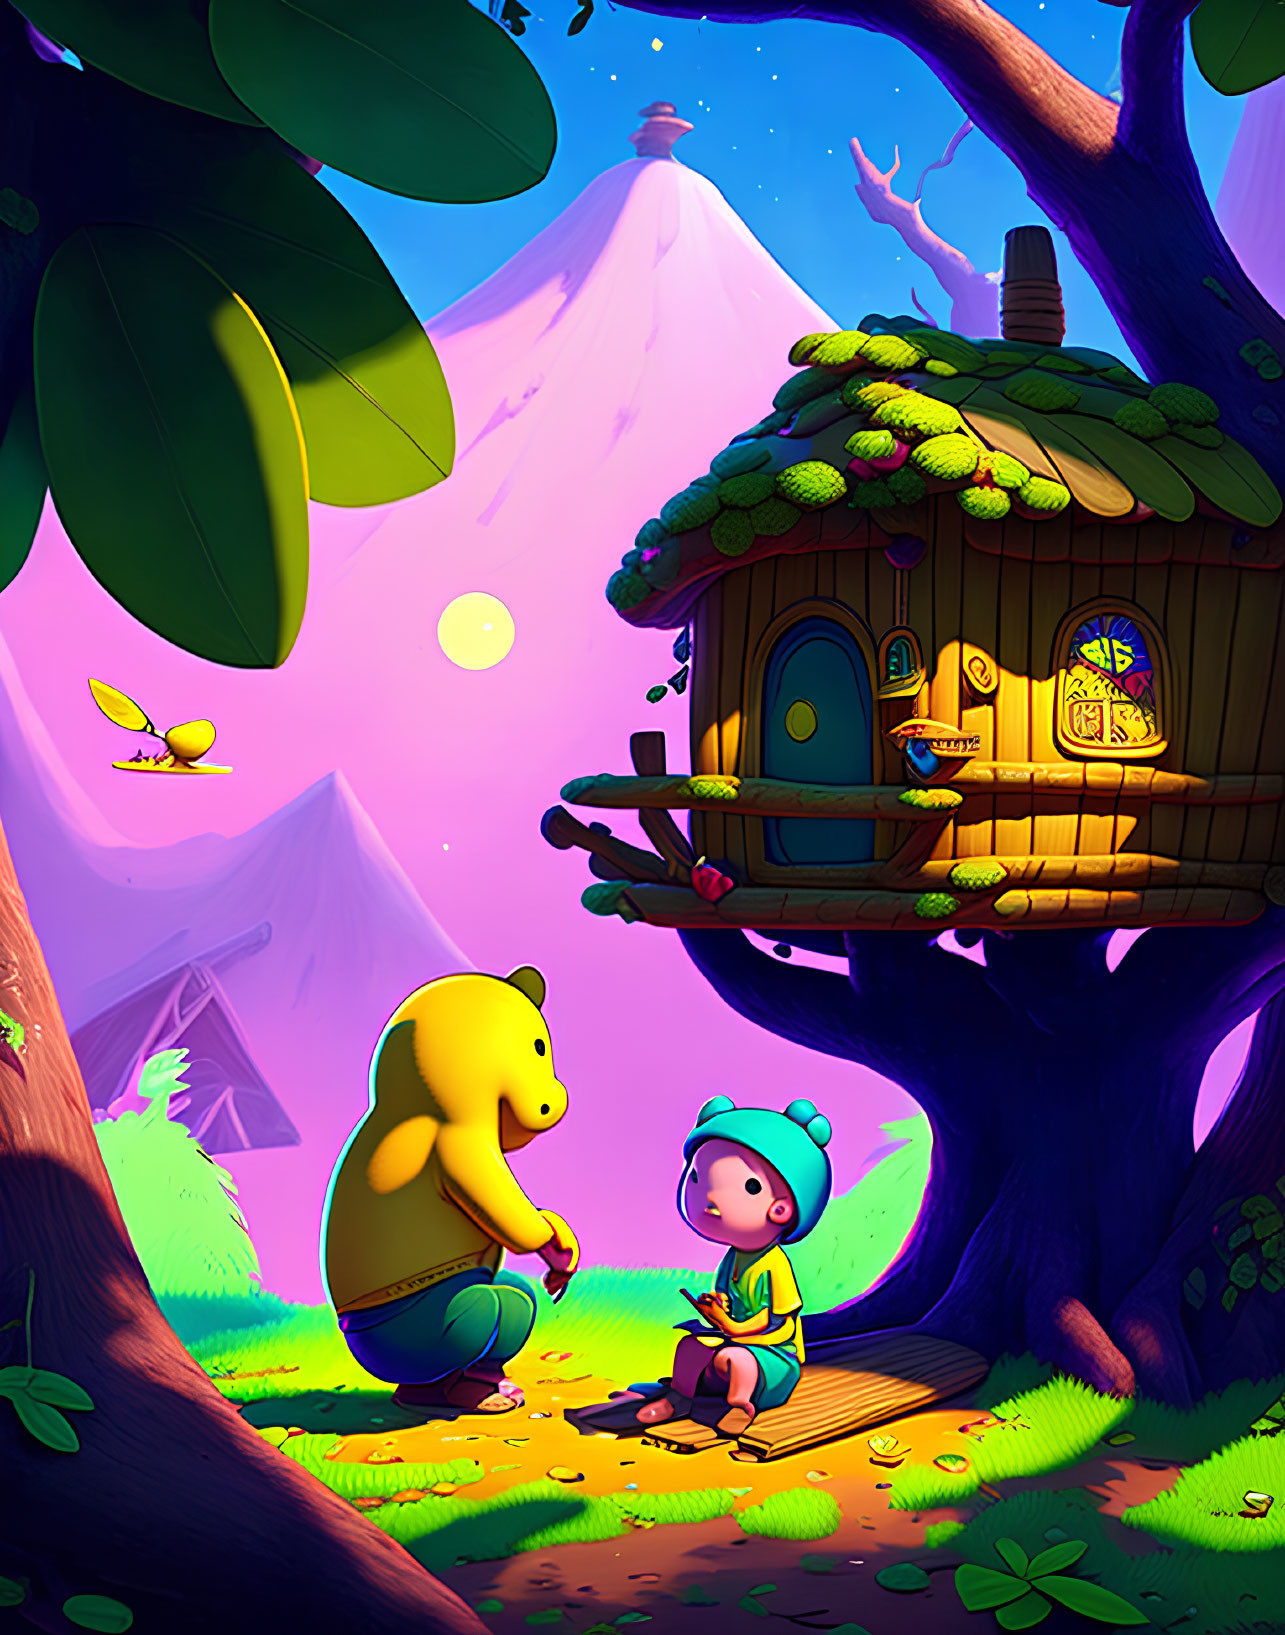 Child and bear-like creature chat near cozy treehouse in vibrant forest